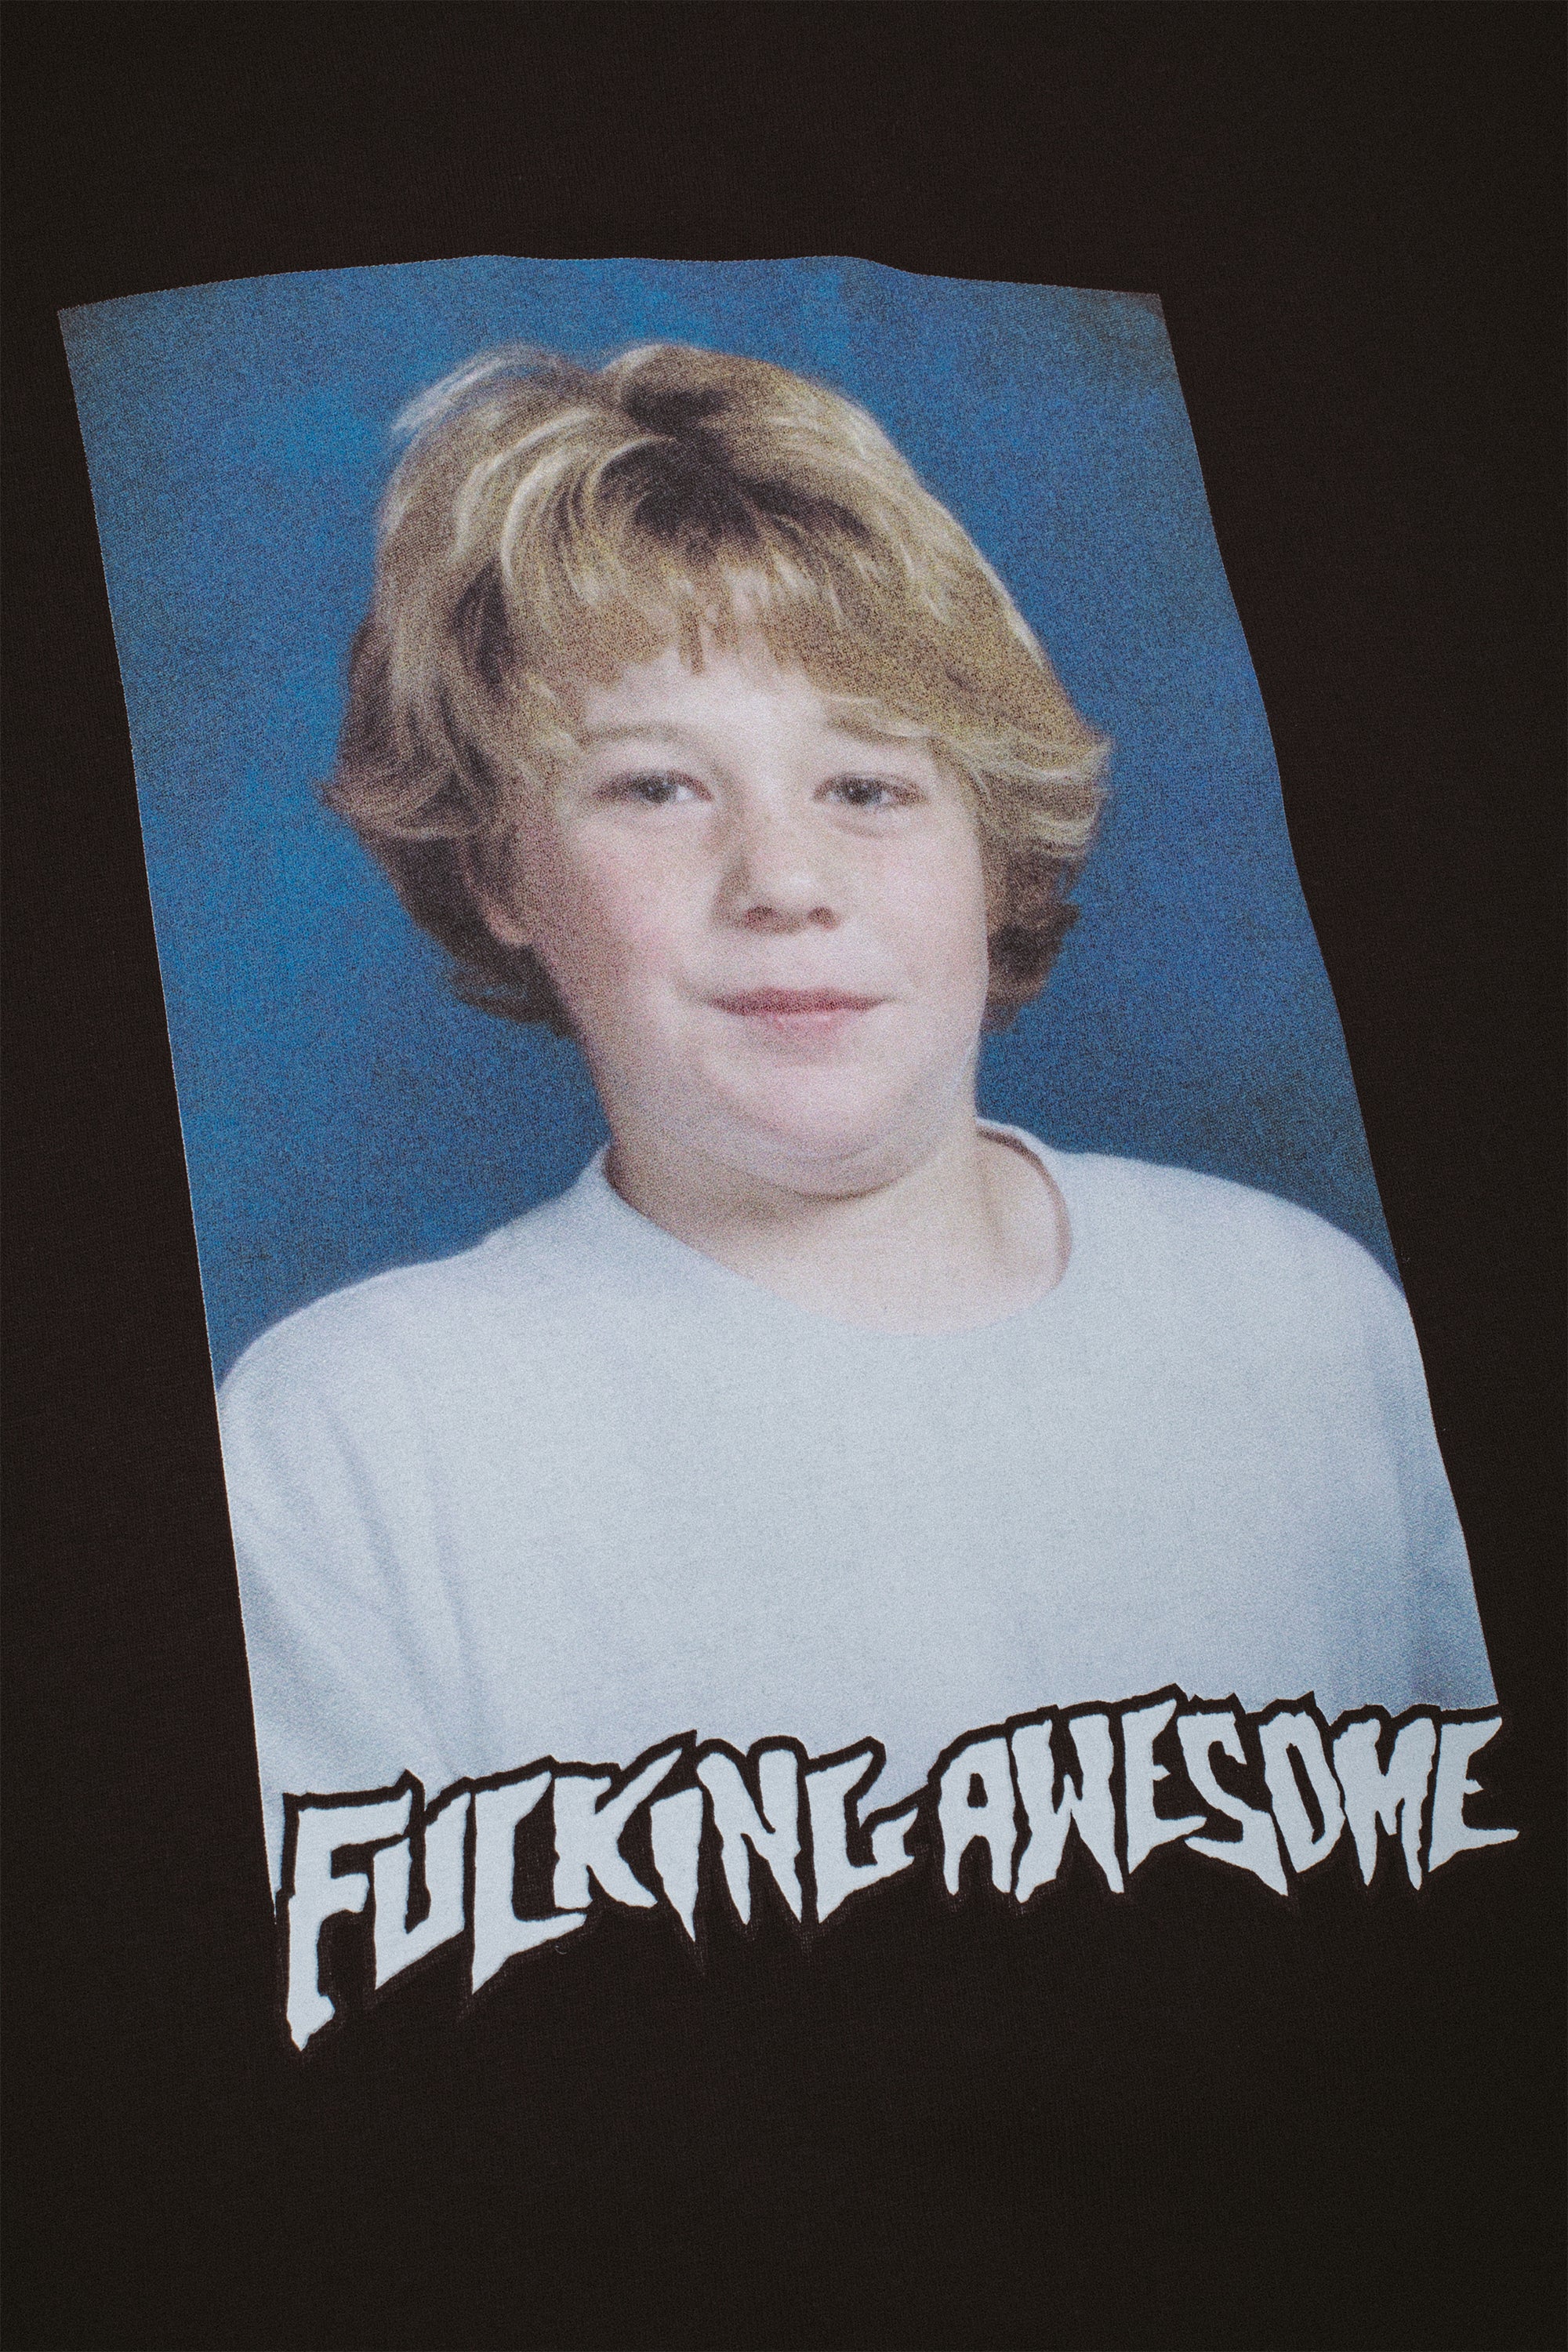 Jake Anderson Class Photo Tee – Fucking Awesome